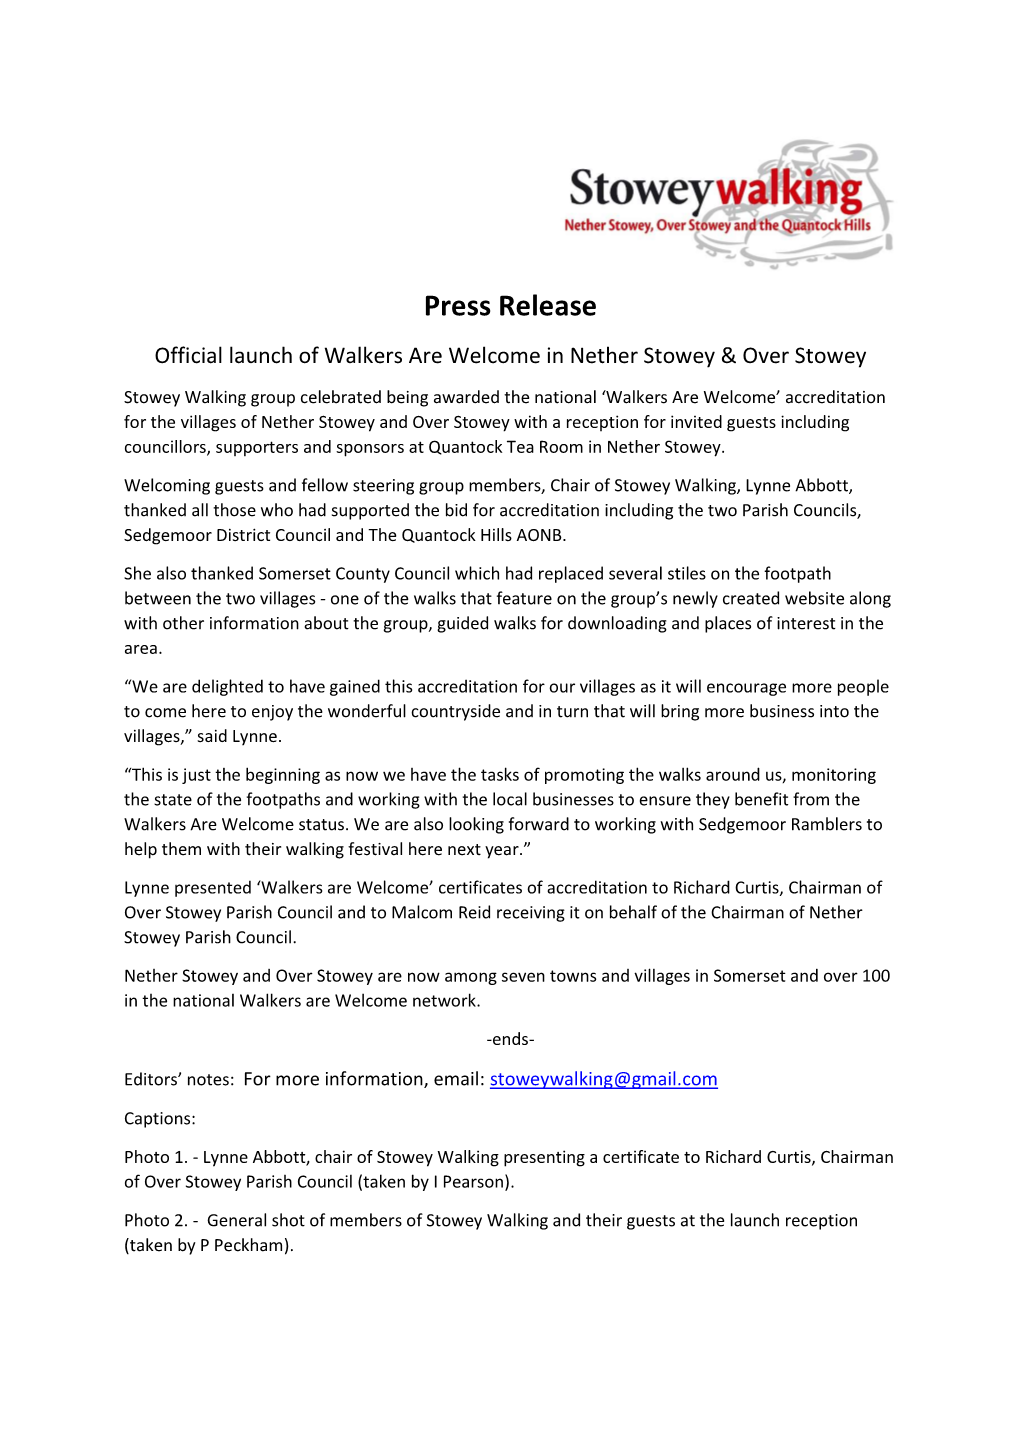 Press Release Official Launch of Walkers Are Welcome in Nether Stowey & Over Stowey